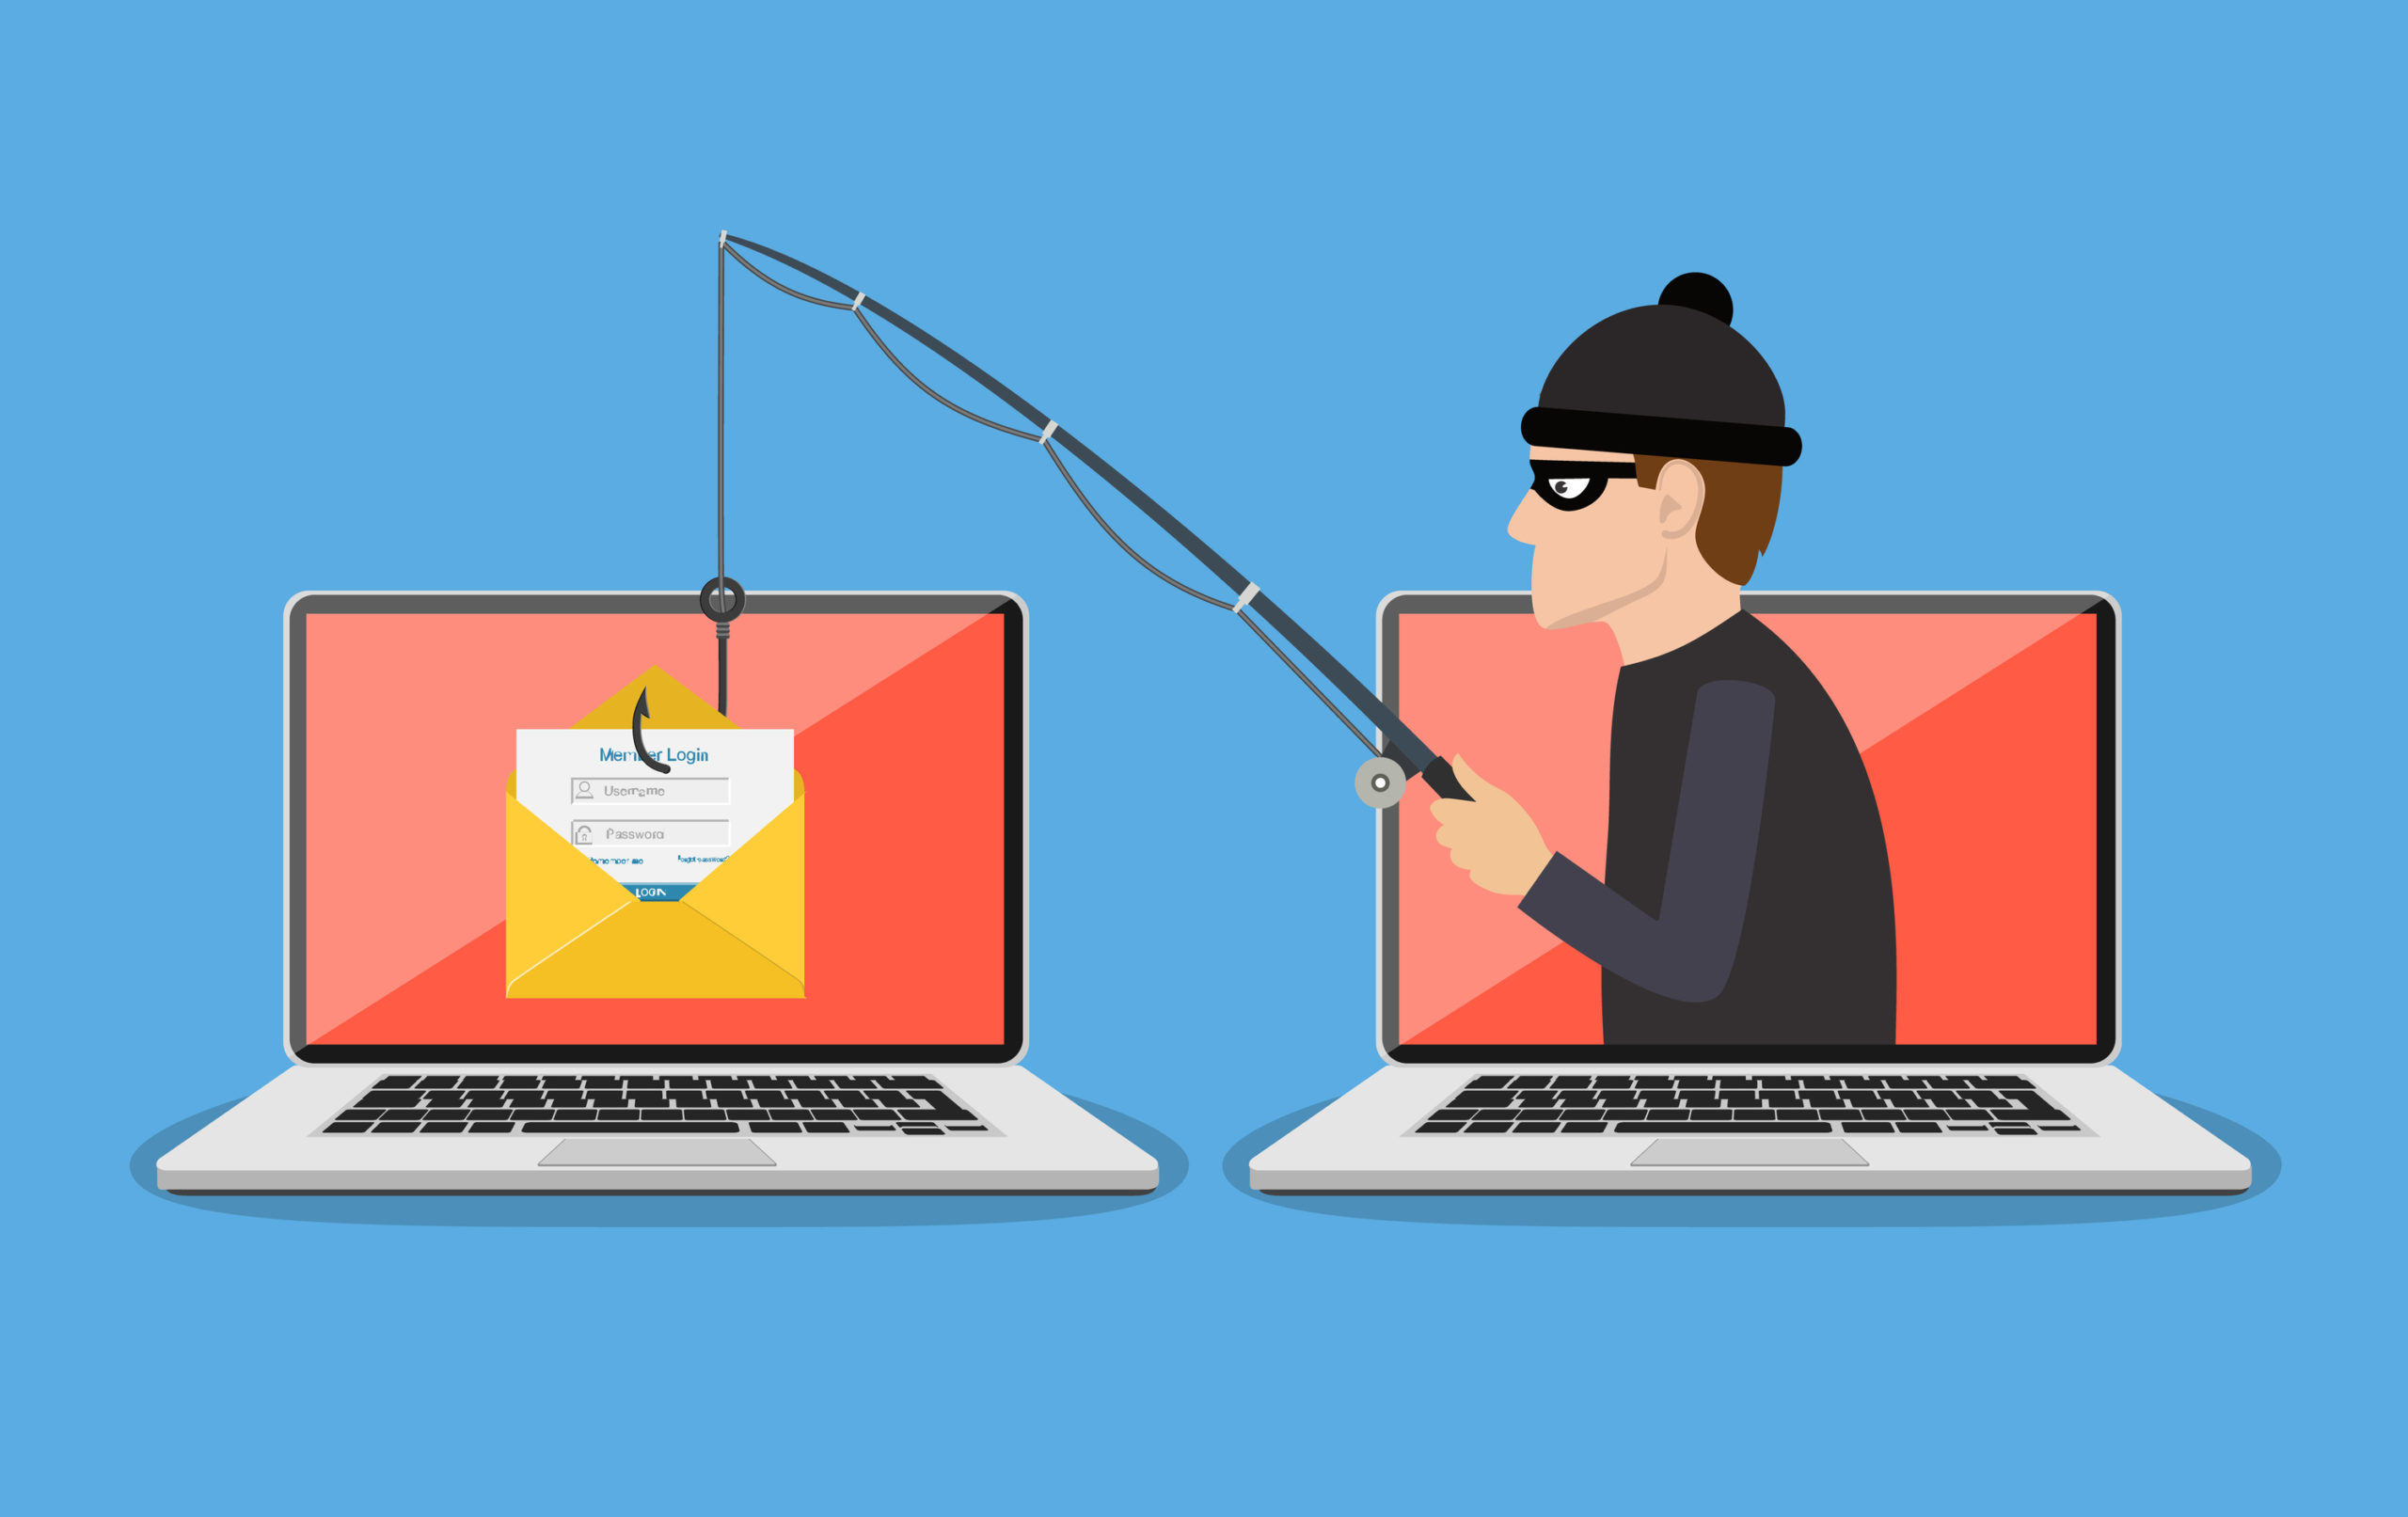 Don't Fall for These New COVID-19 Phishing Scams!